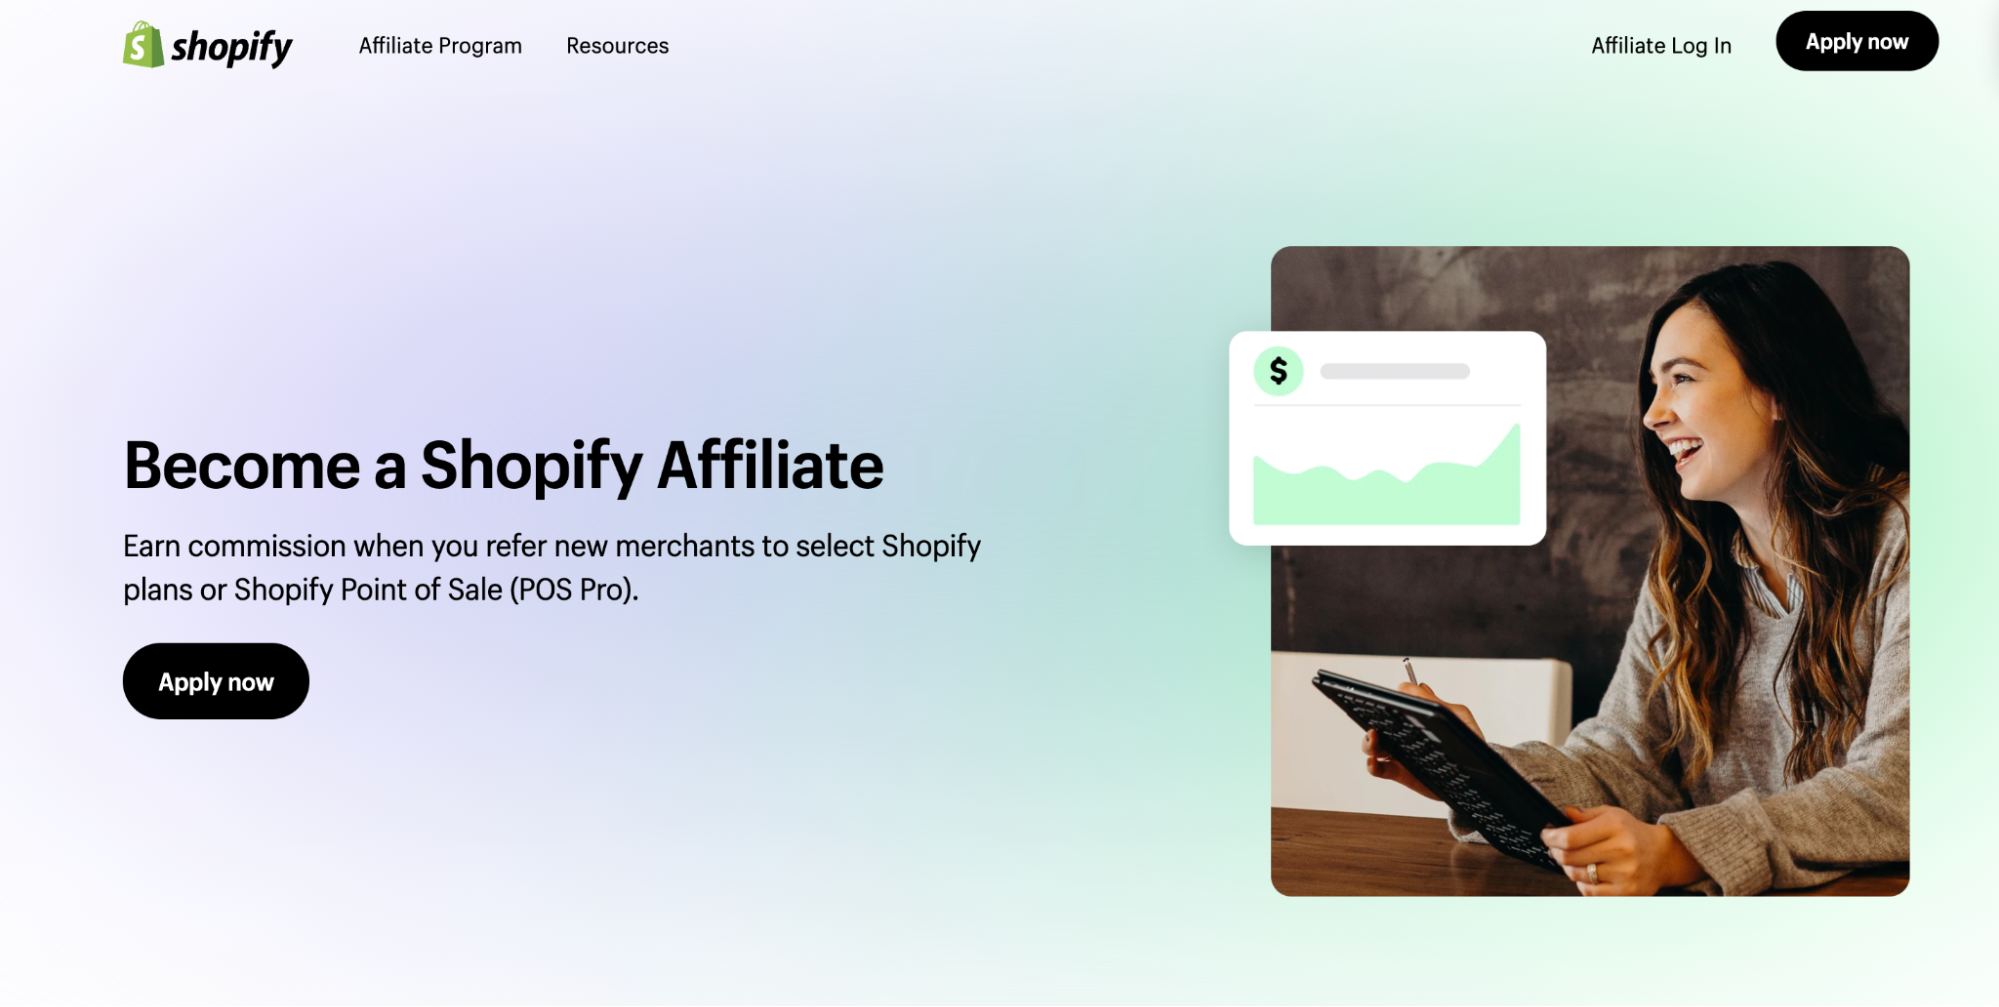 A screenshot of Shopify’s Affiliate Program page.